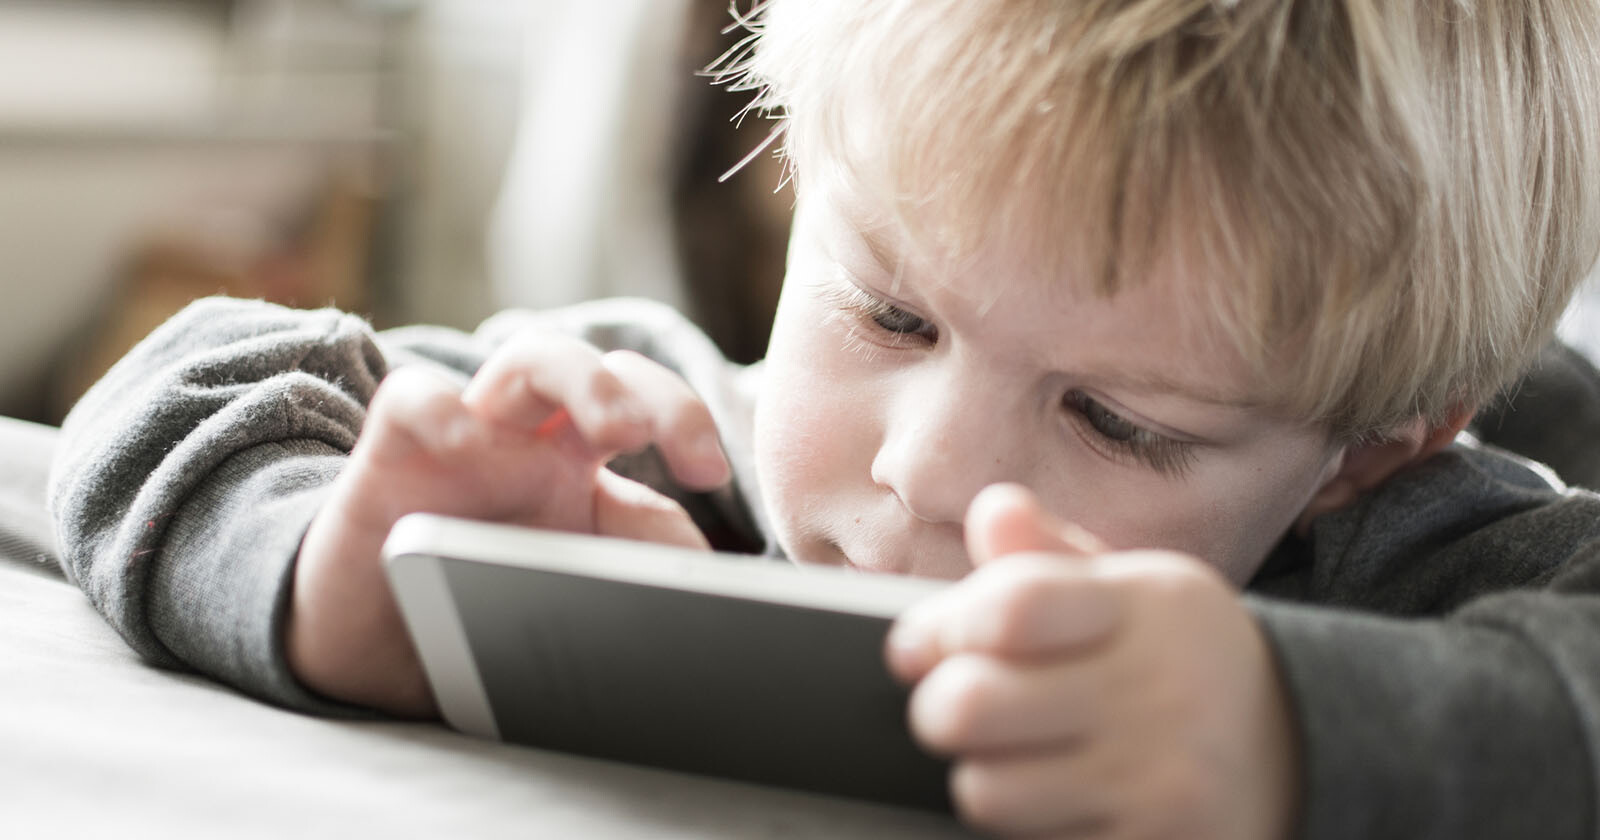 Report Reveals How Children are Watching Two Videos at the Same Time